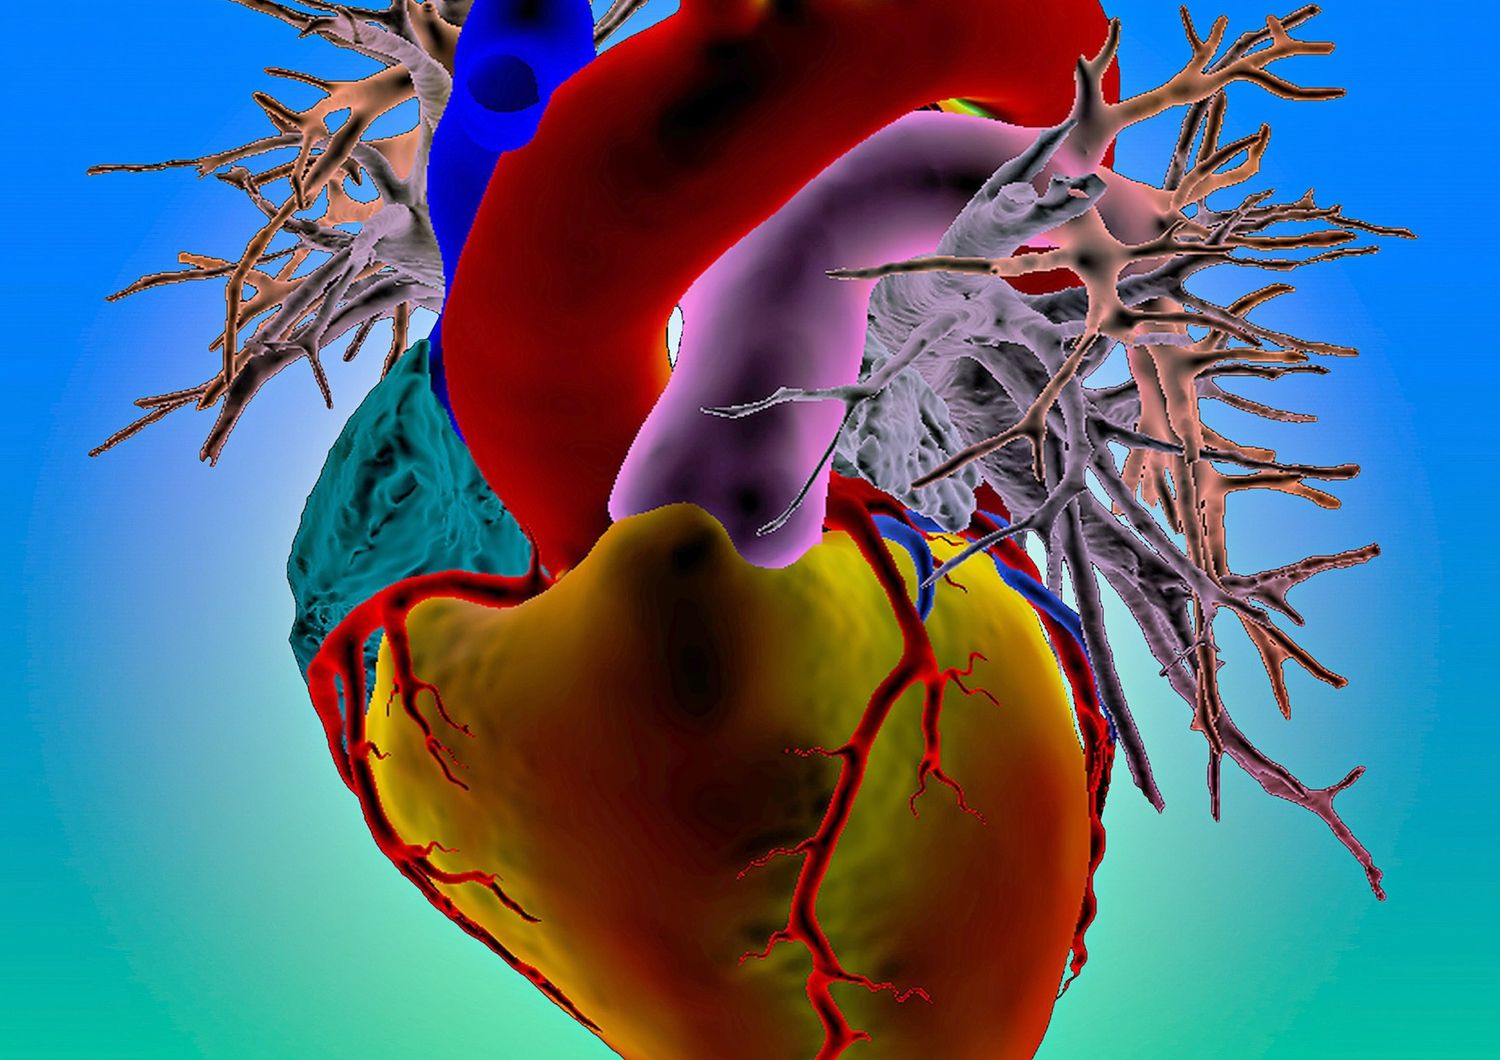 Cuore in 3D